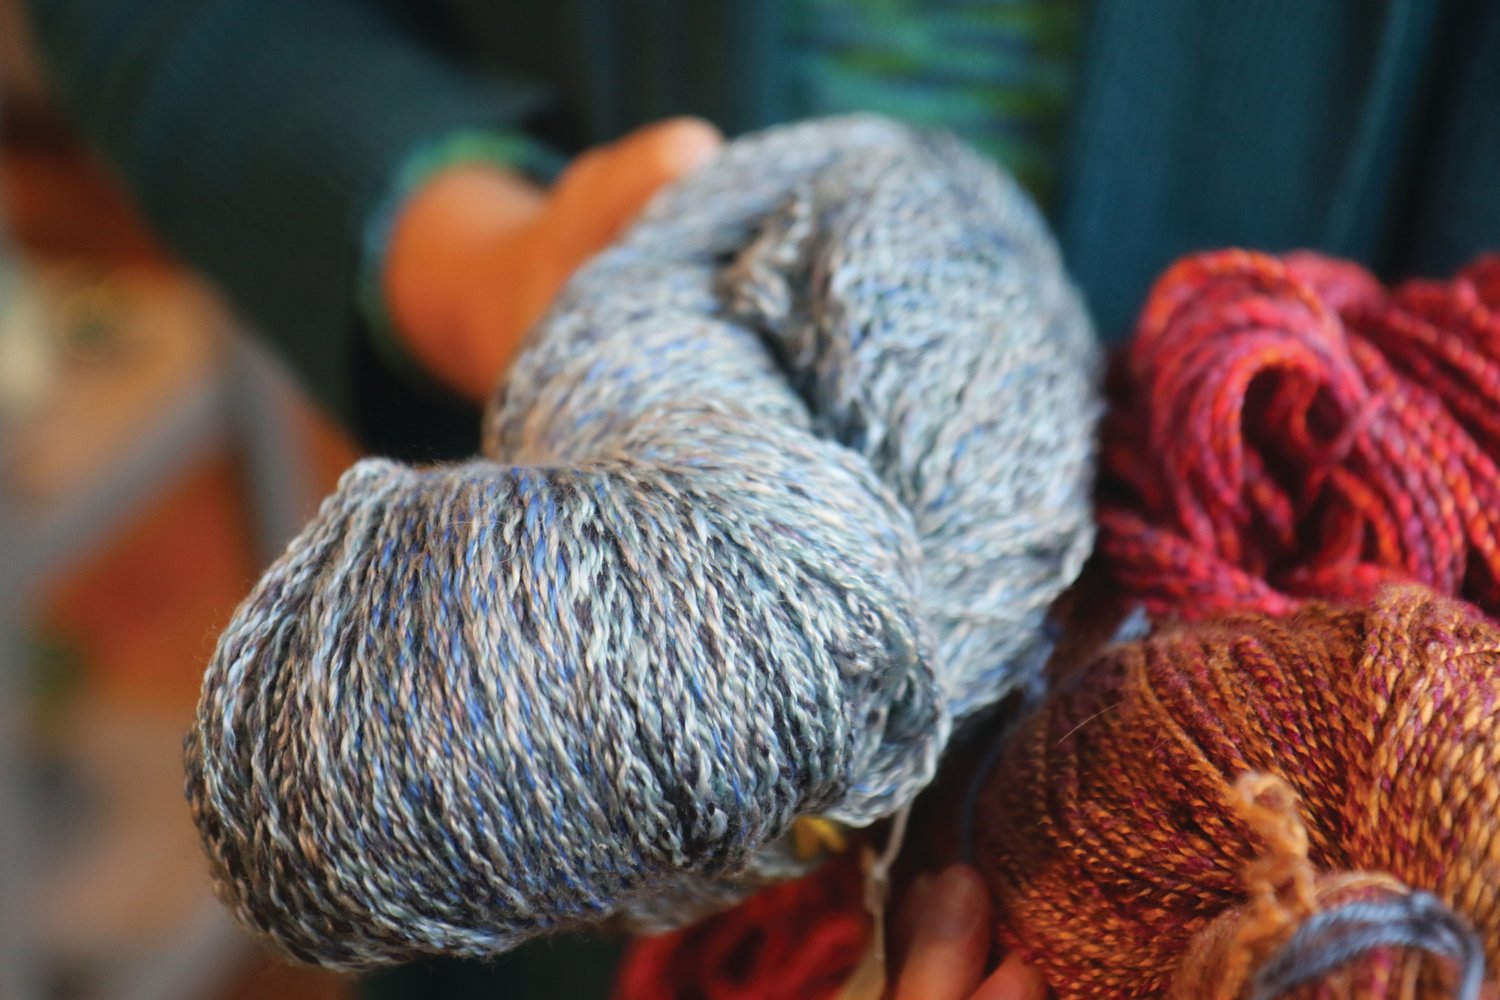 Bright skeins of yarn punctuate Fiber and Clay, where Lise Solvang and her partner potter Scot Olson play with texture and color.